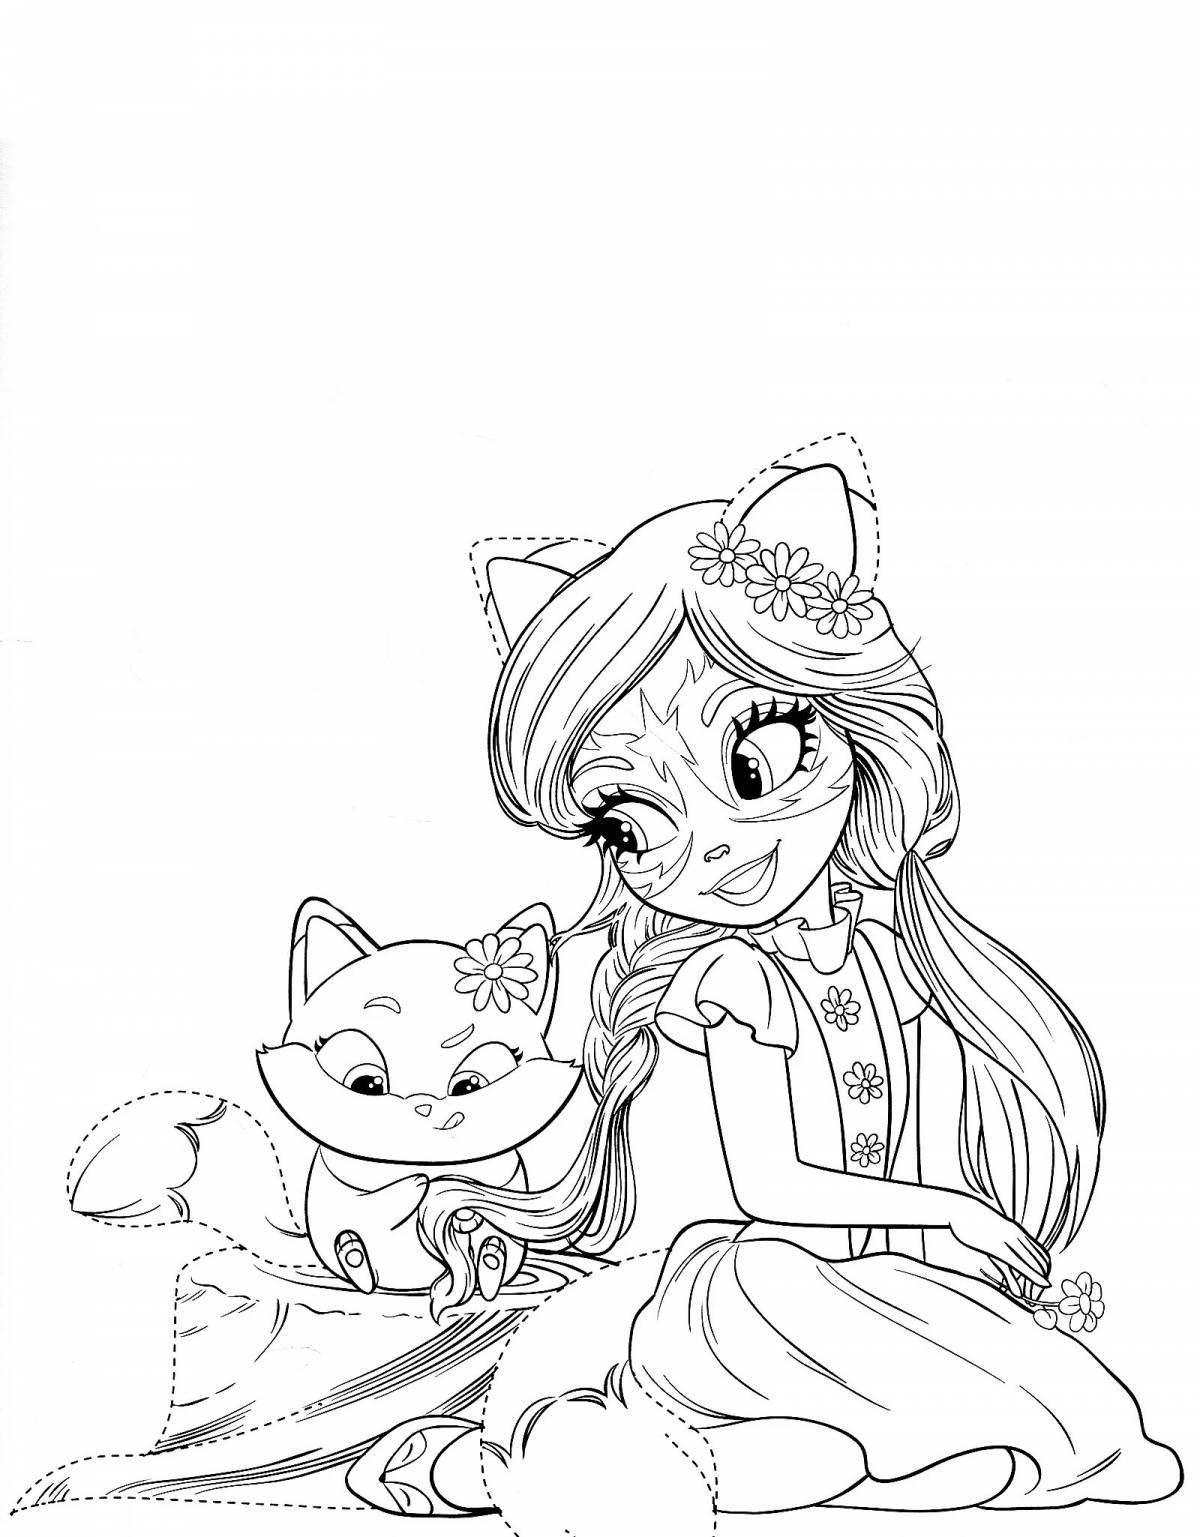 Outstanding enchantimals cat coloring page